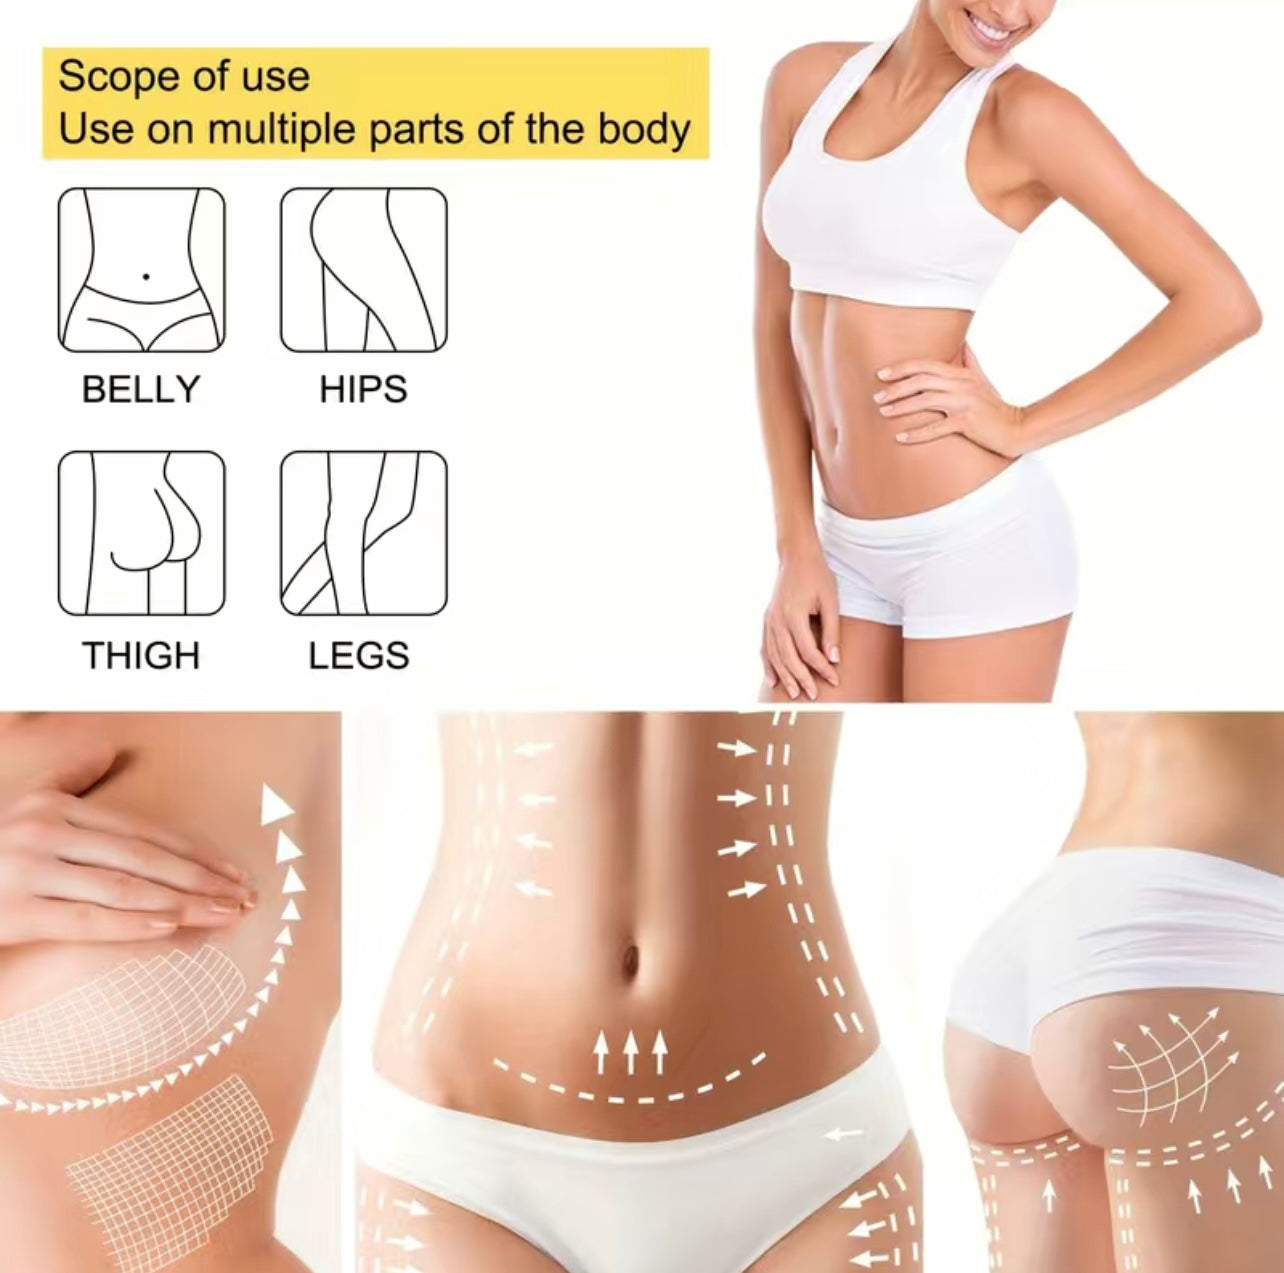 4 piece body slimming and body contouring wraps. Body wraps for weight loss. Detoxing body wrap. Detox body slimming wrap. At home body slimming, TikTok vital products, TikTok made me buy it, best of TikTok, salon products at home, salon quality products, body slimming, body sculpting, body contouring, body wraps, home use salon products, weight loss, best diet supplements 